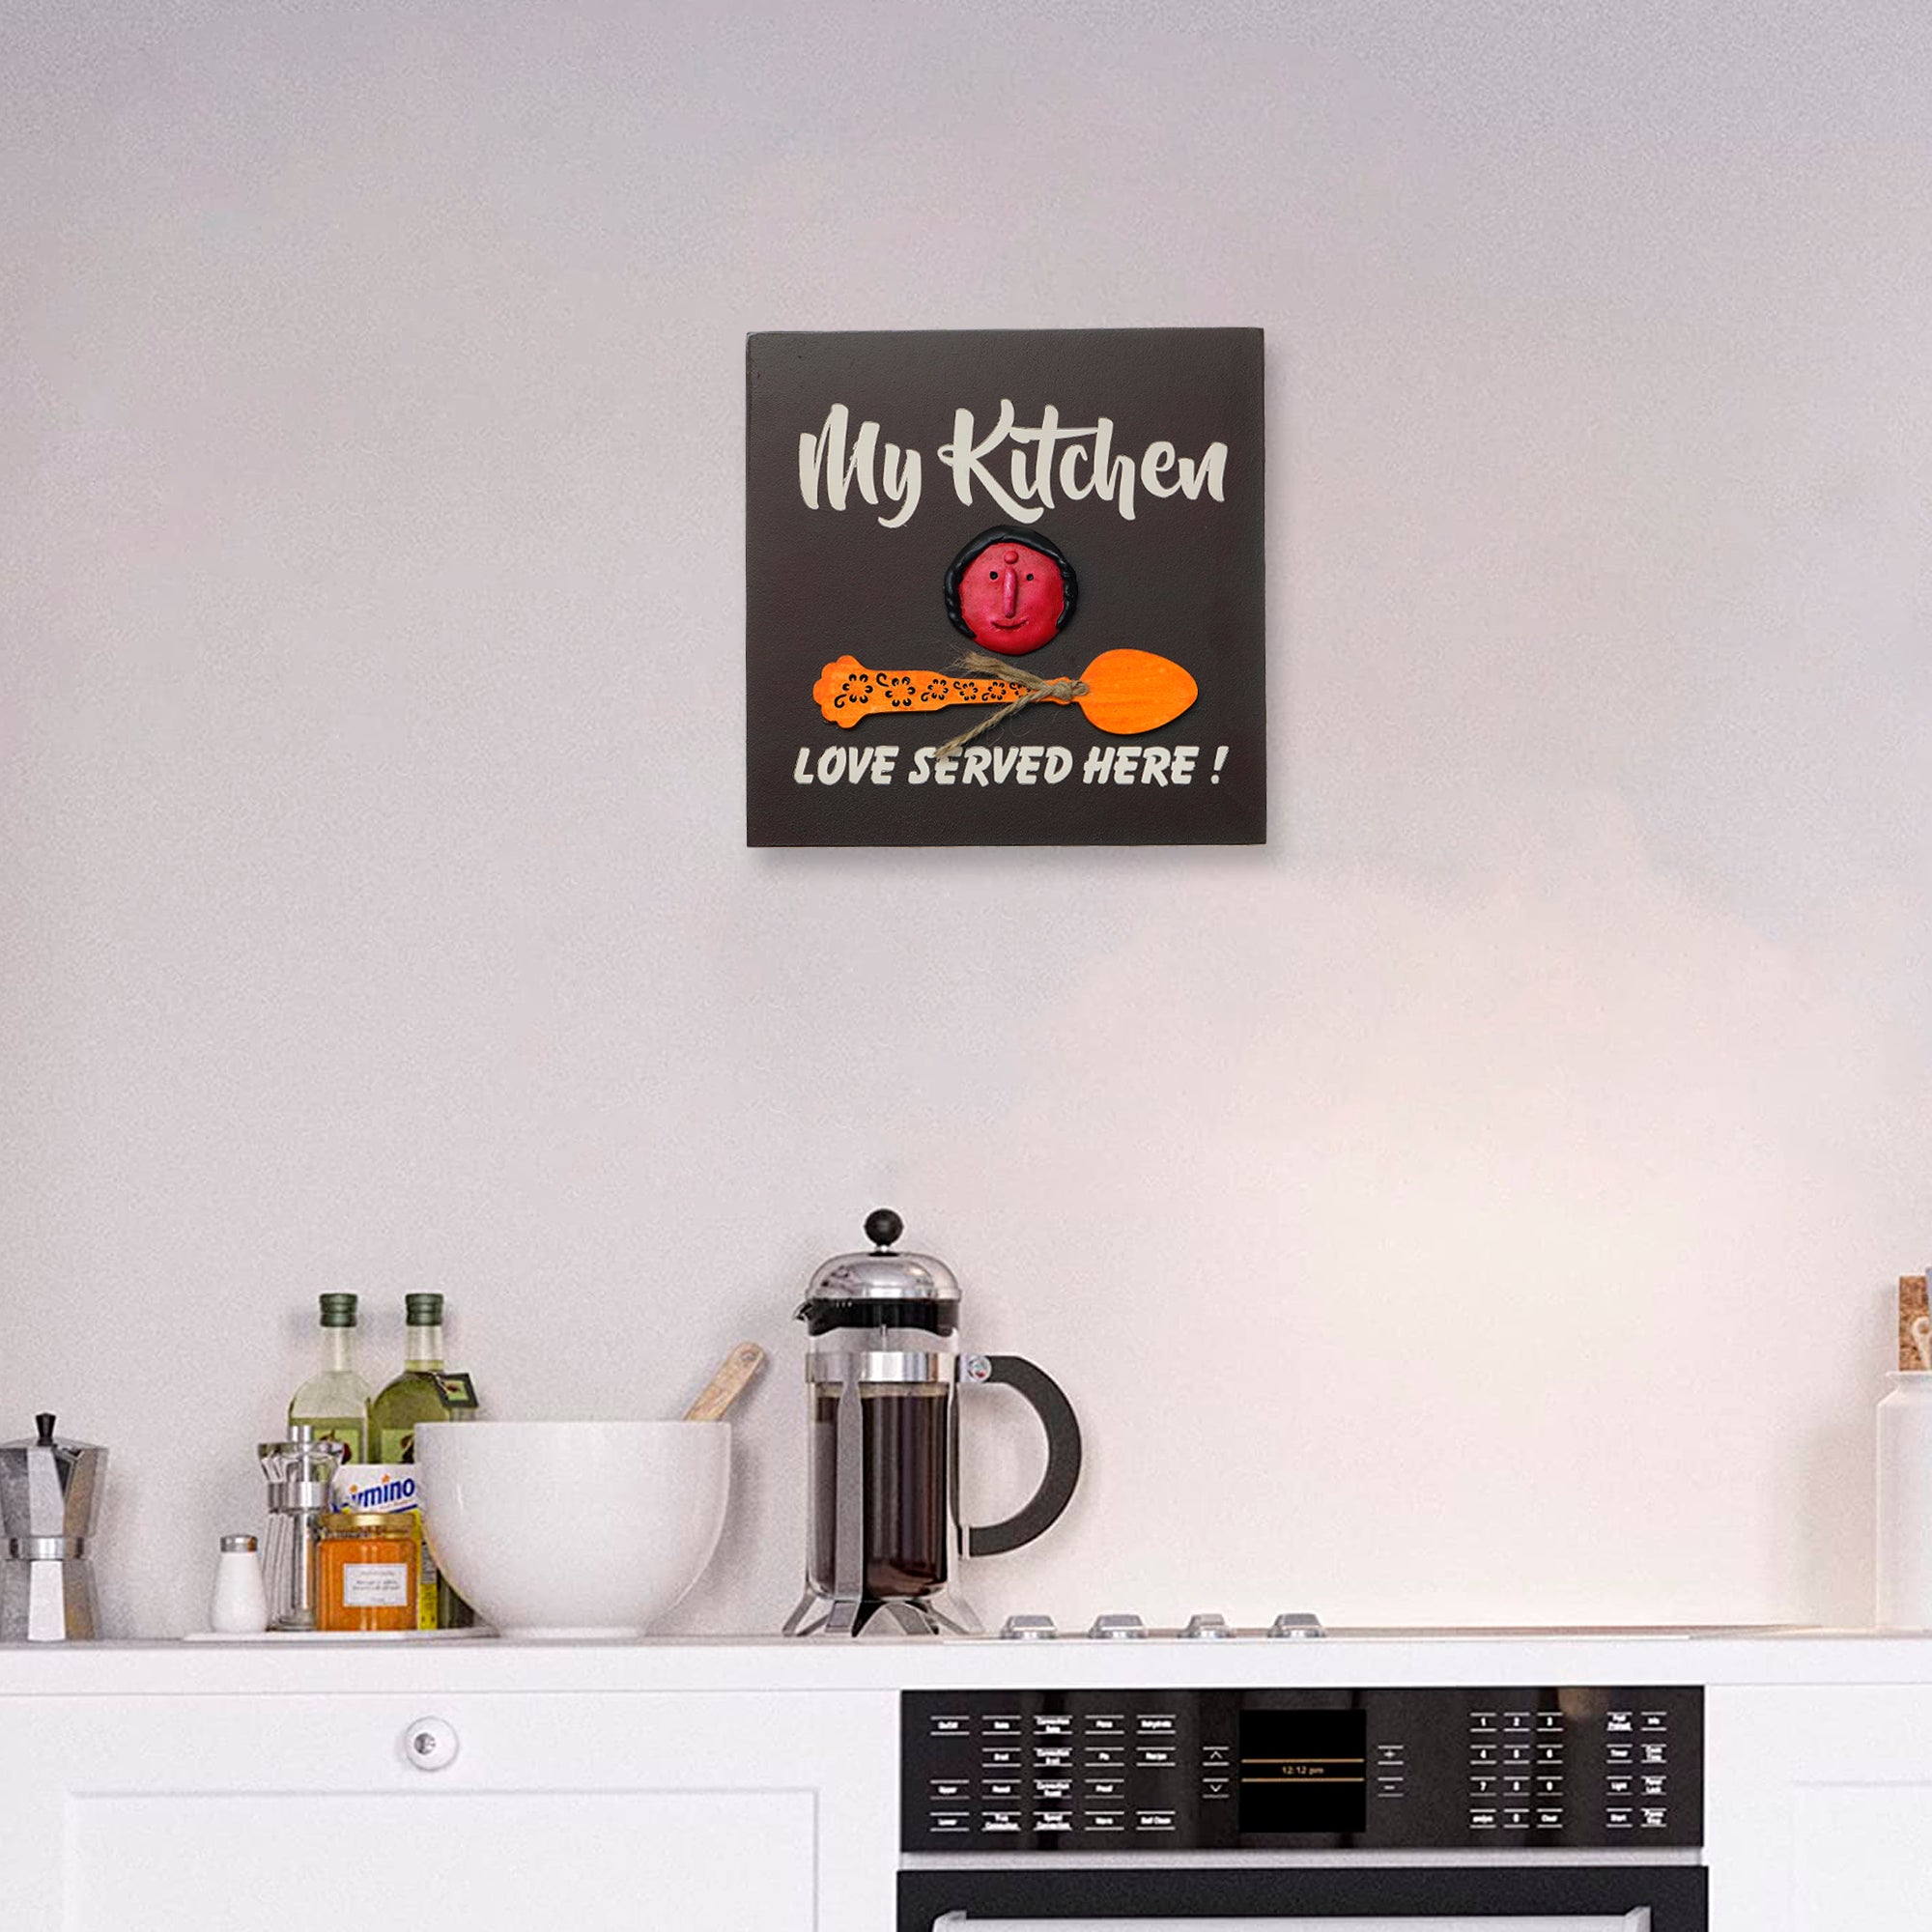 "My Kitchen, Love Served Here!" Mother's Love Theme Decorative Wooden Wall Hanging